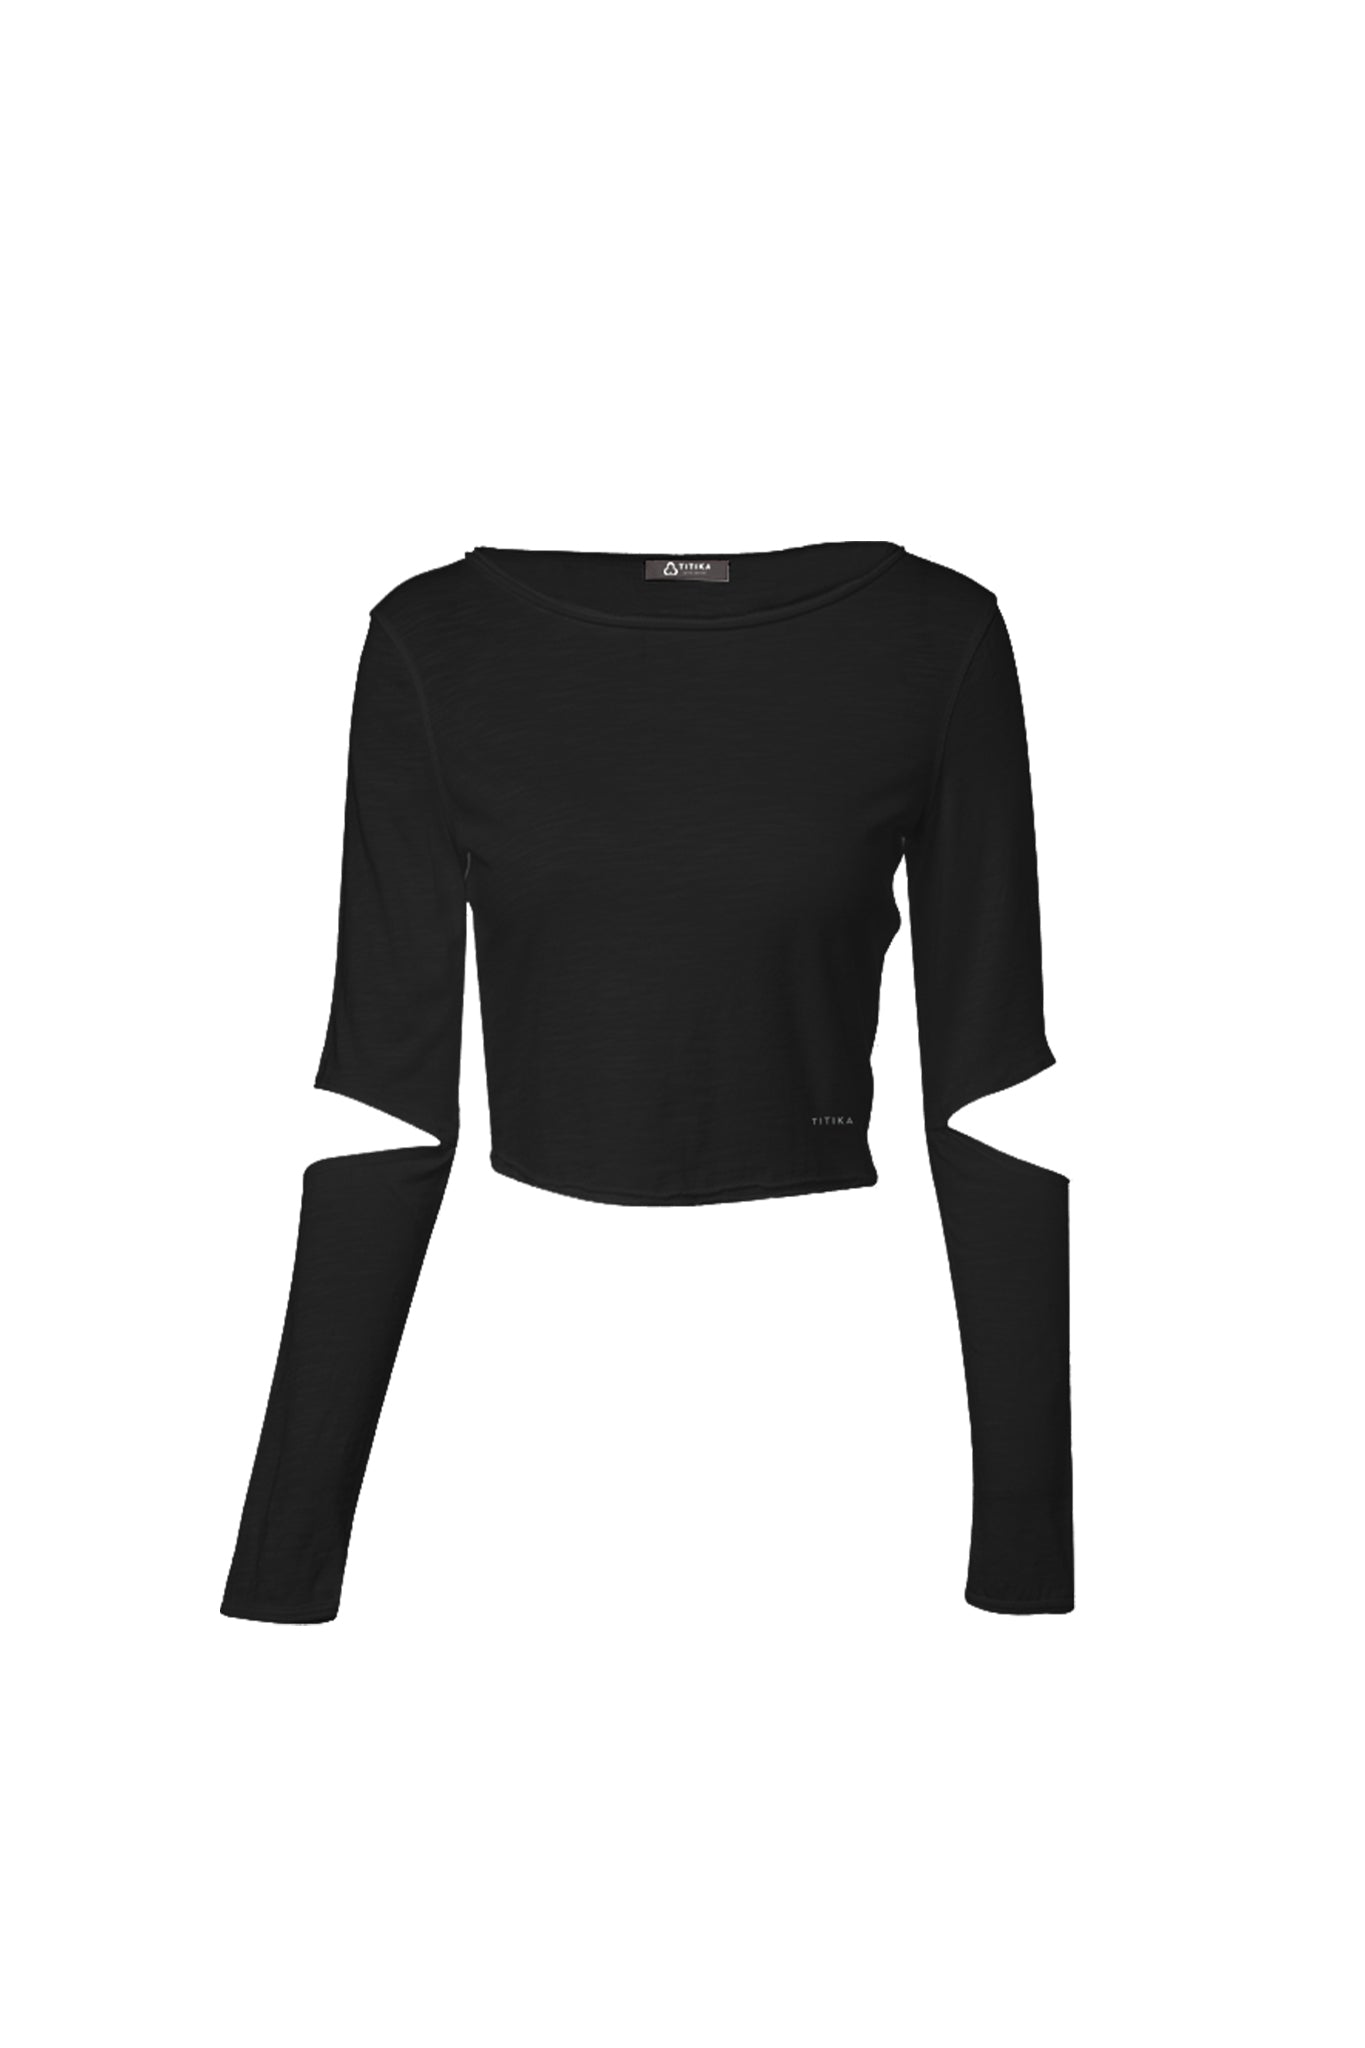 Bianca Cut-Out Top